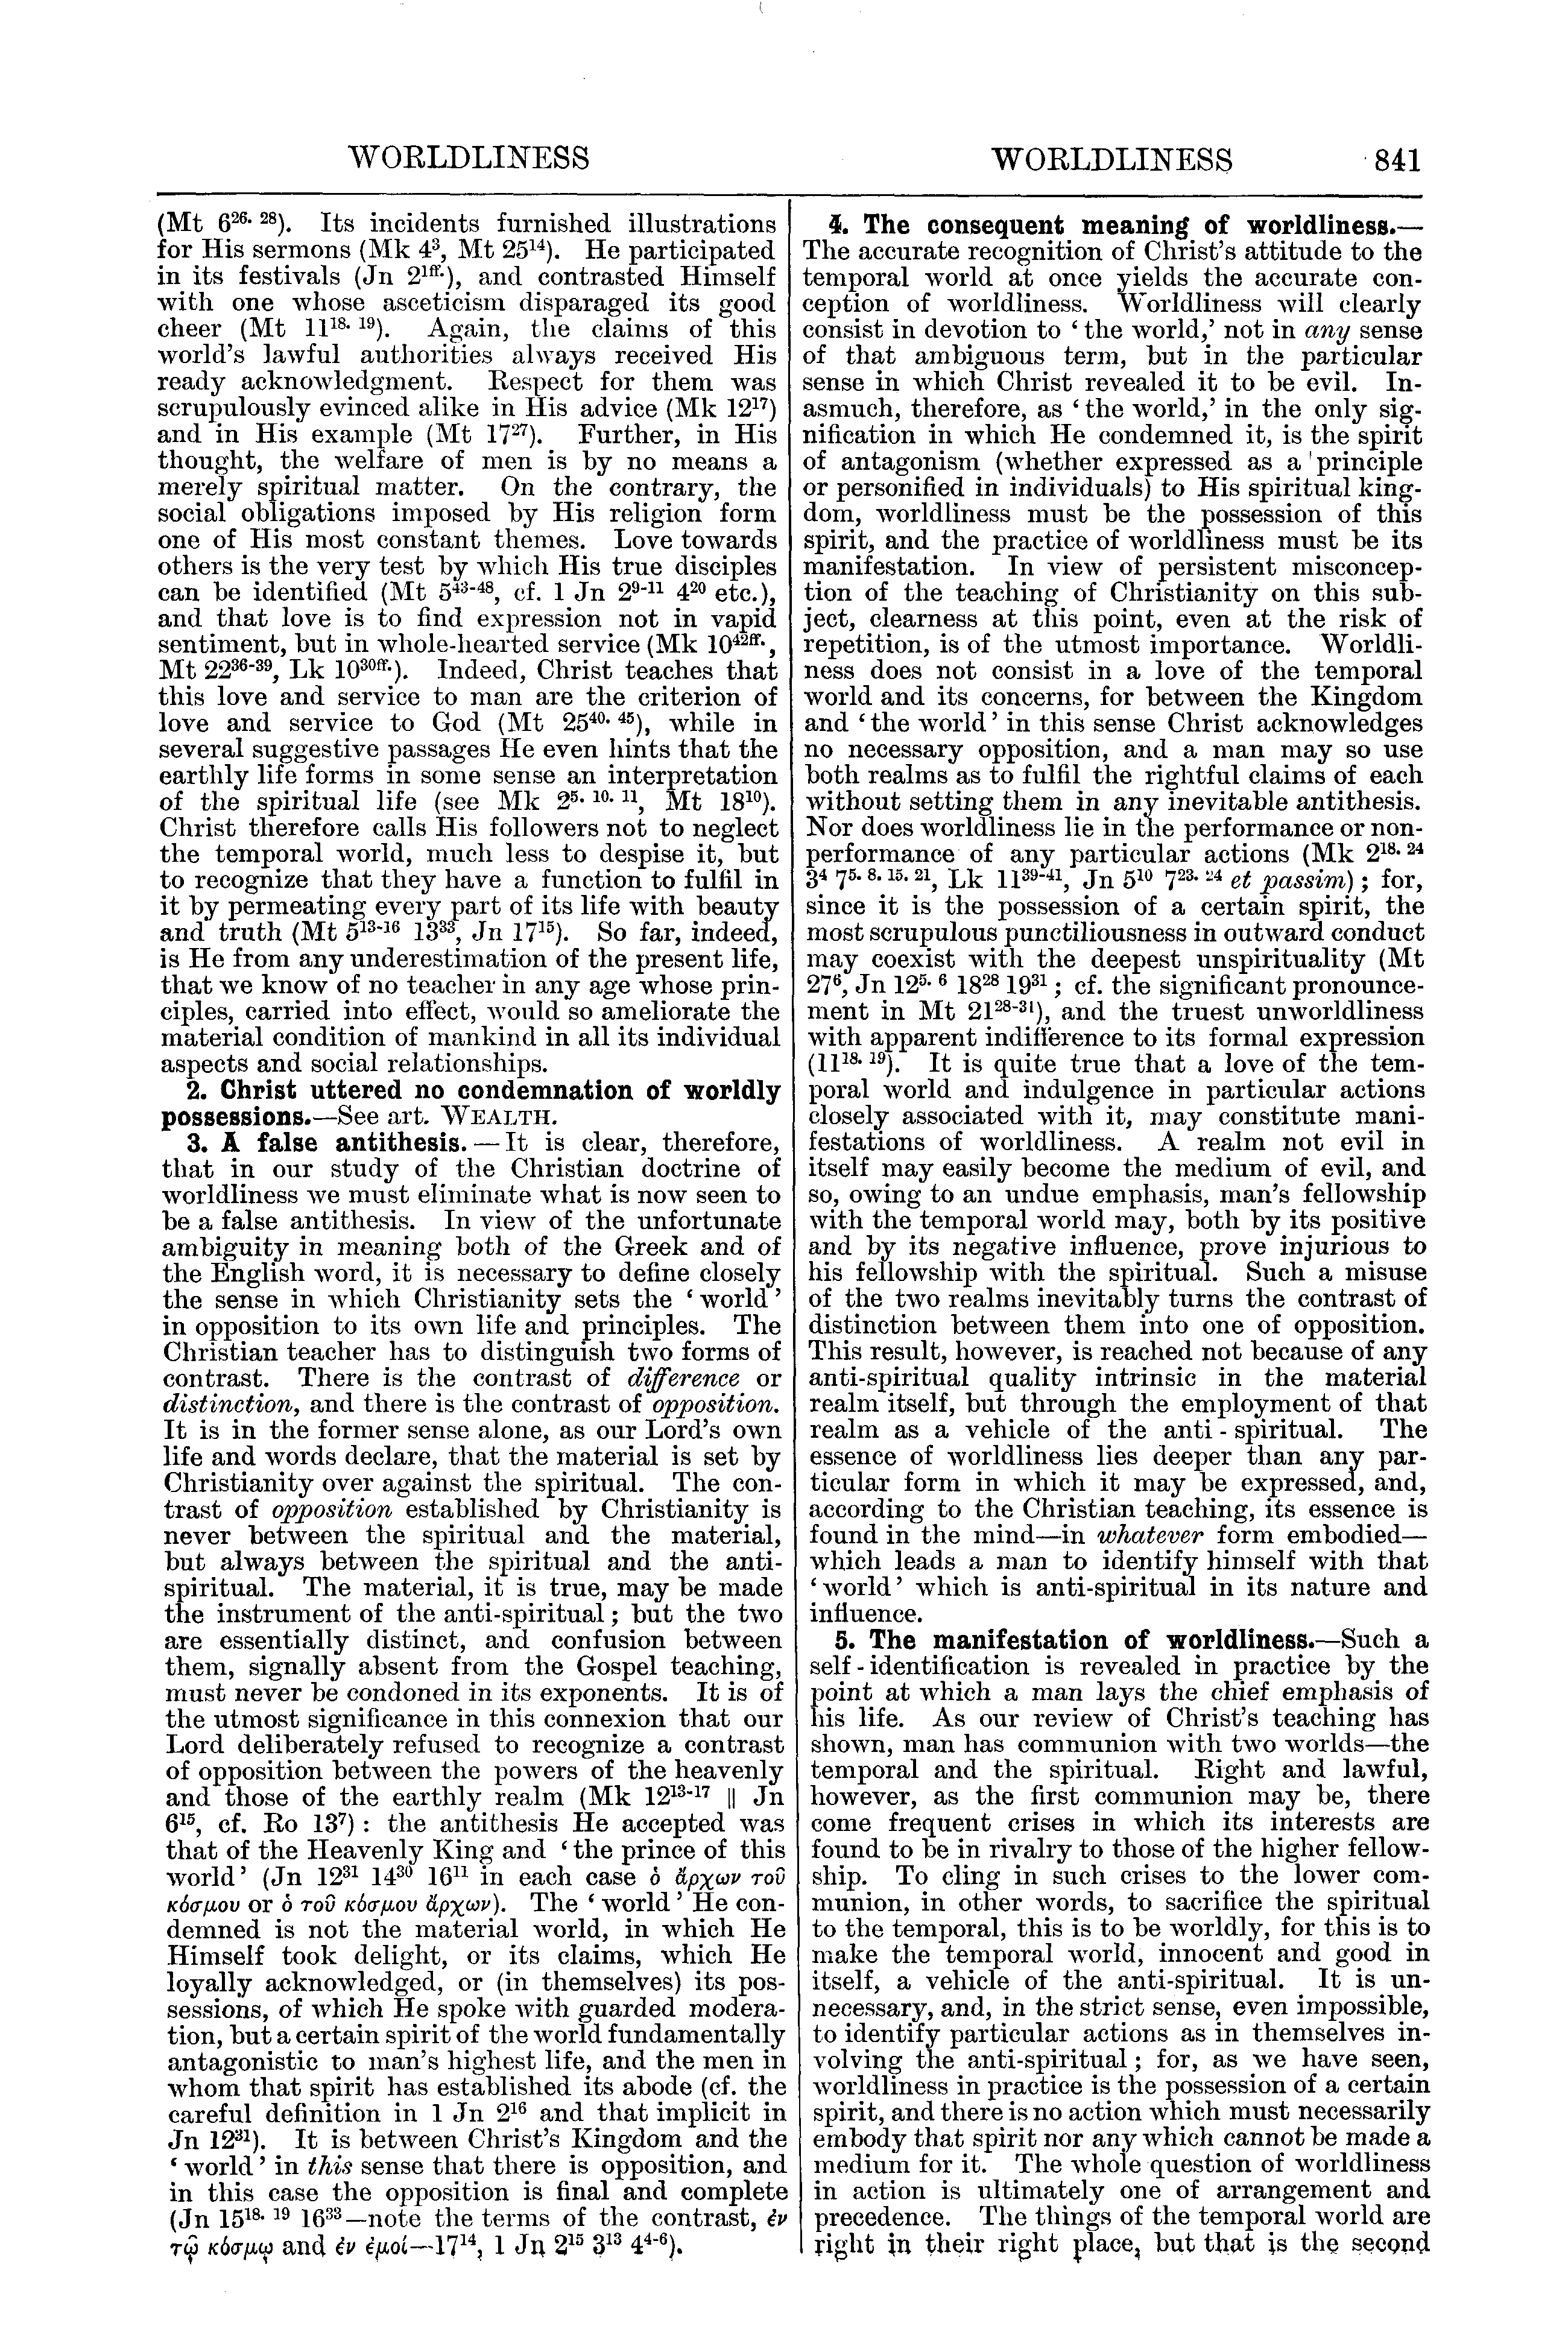 Image of page 841